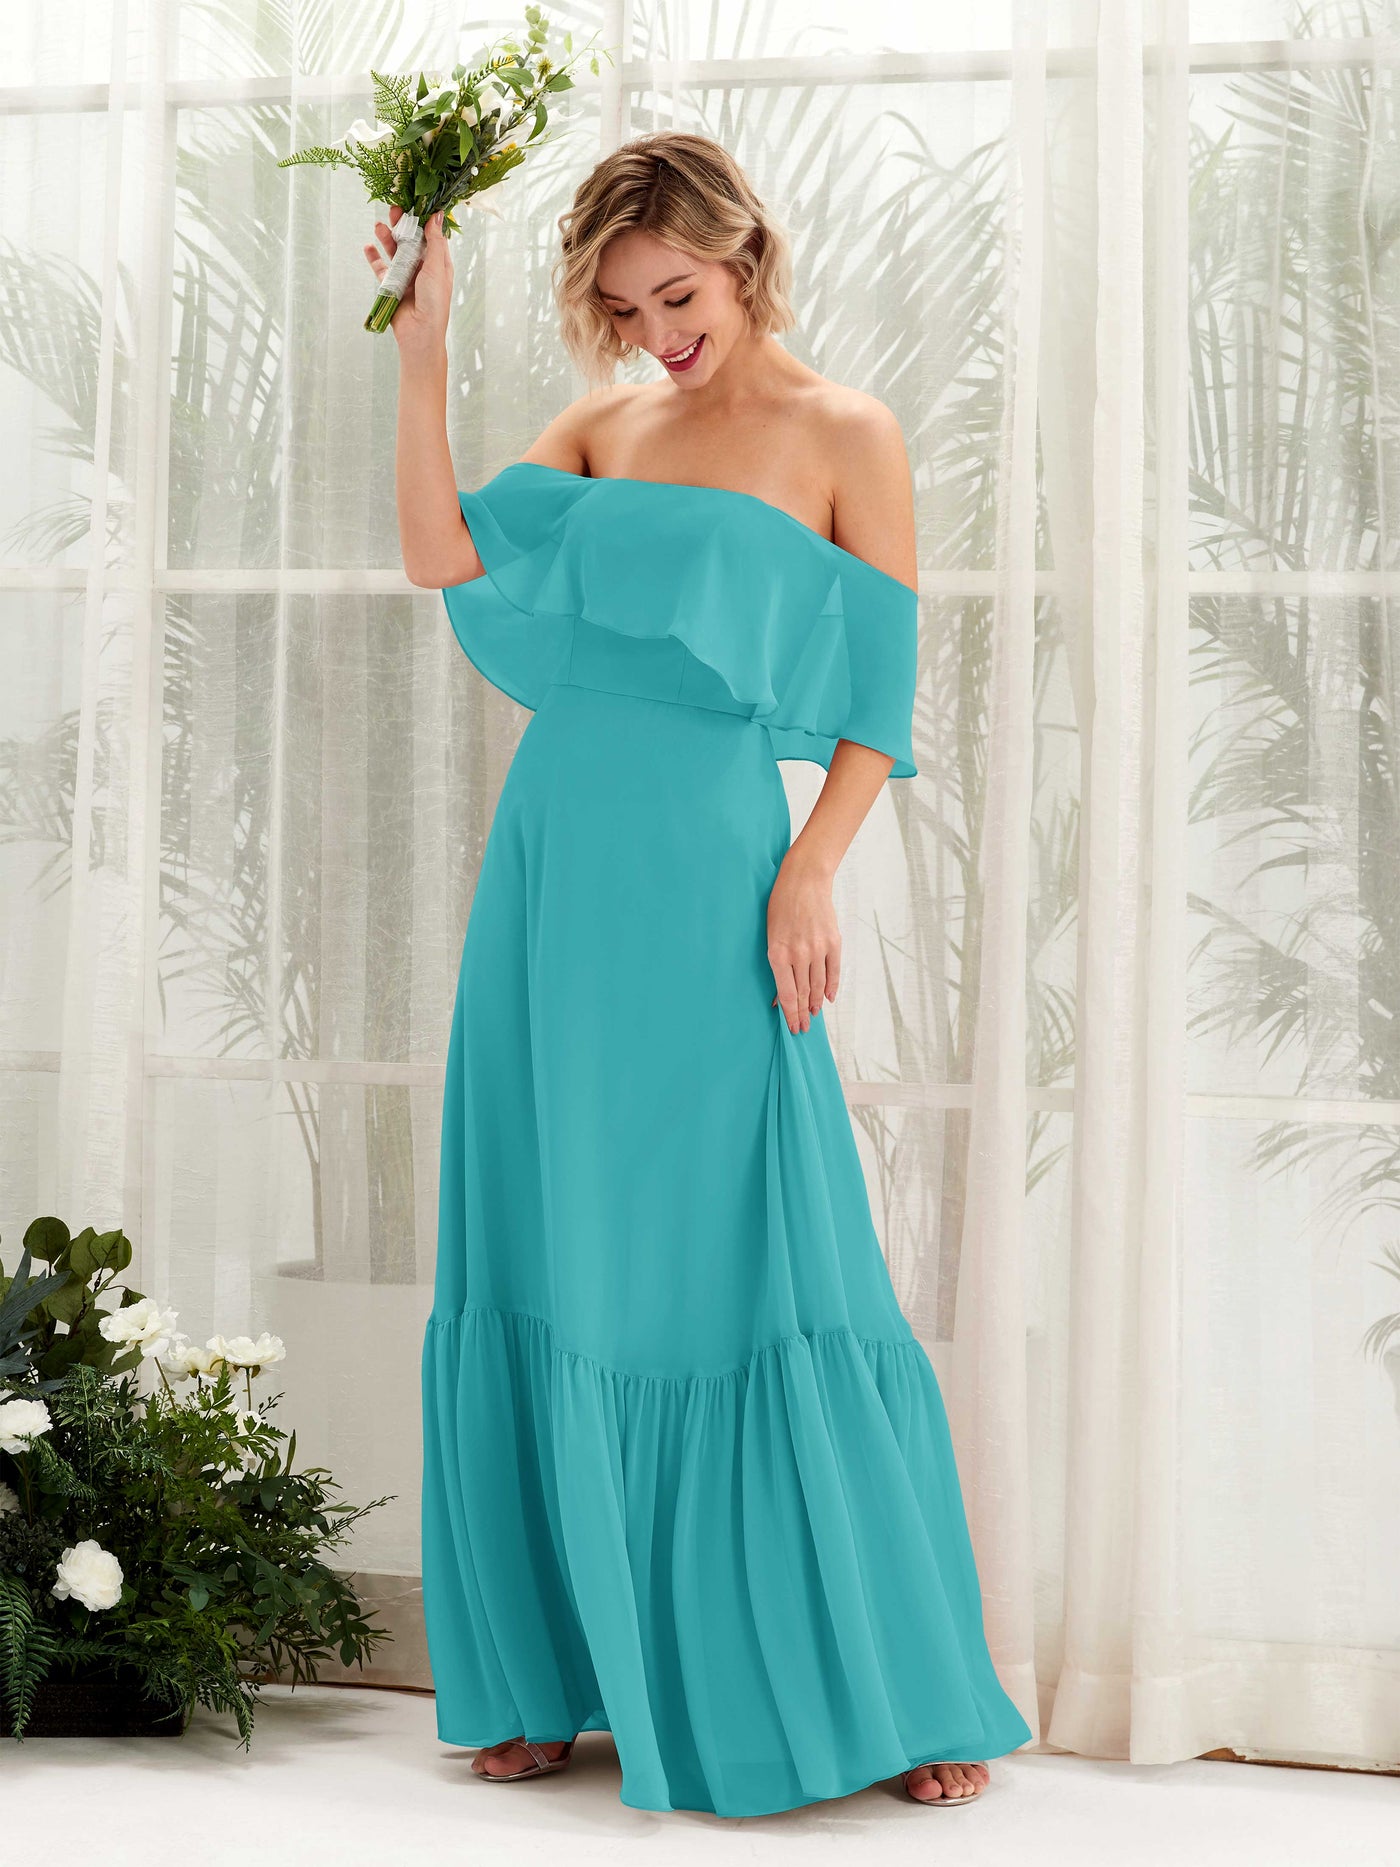 Turquoise Bridesmaid Dresses Bridesmaid Dress A-line Chiffon Off Shoulder Full Length Sleeveless Wedding Party Dress (81224523)#color_turquoise